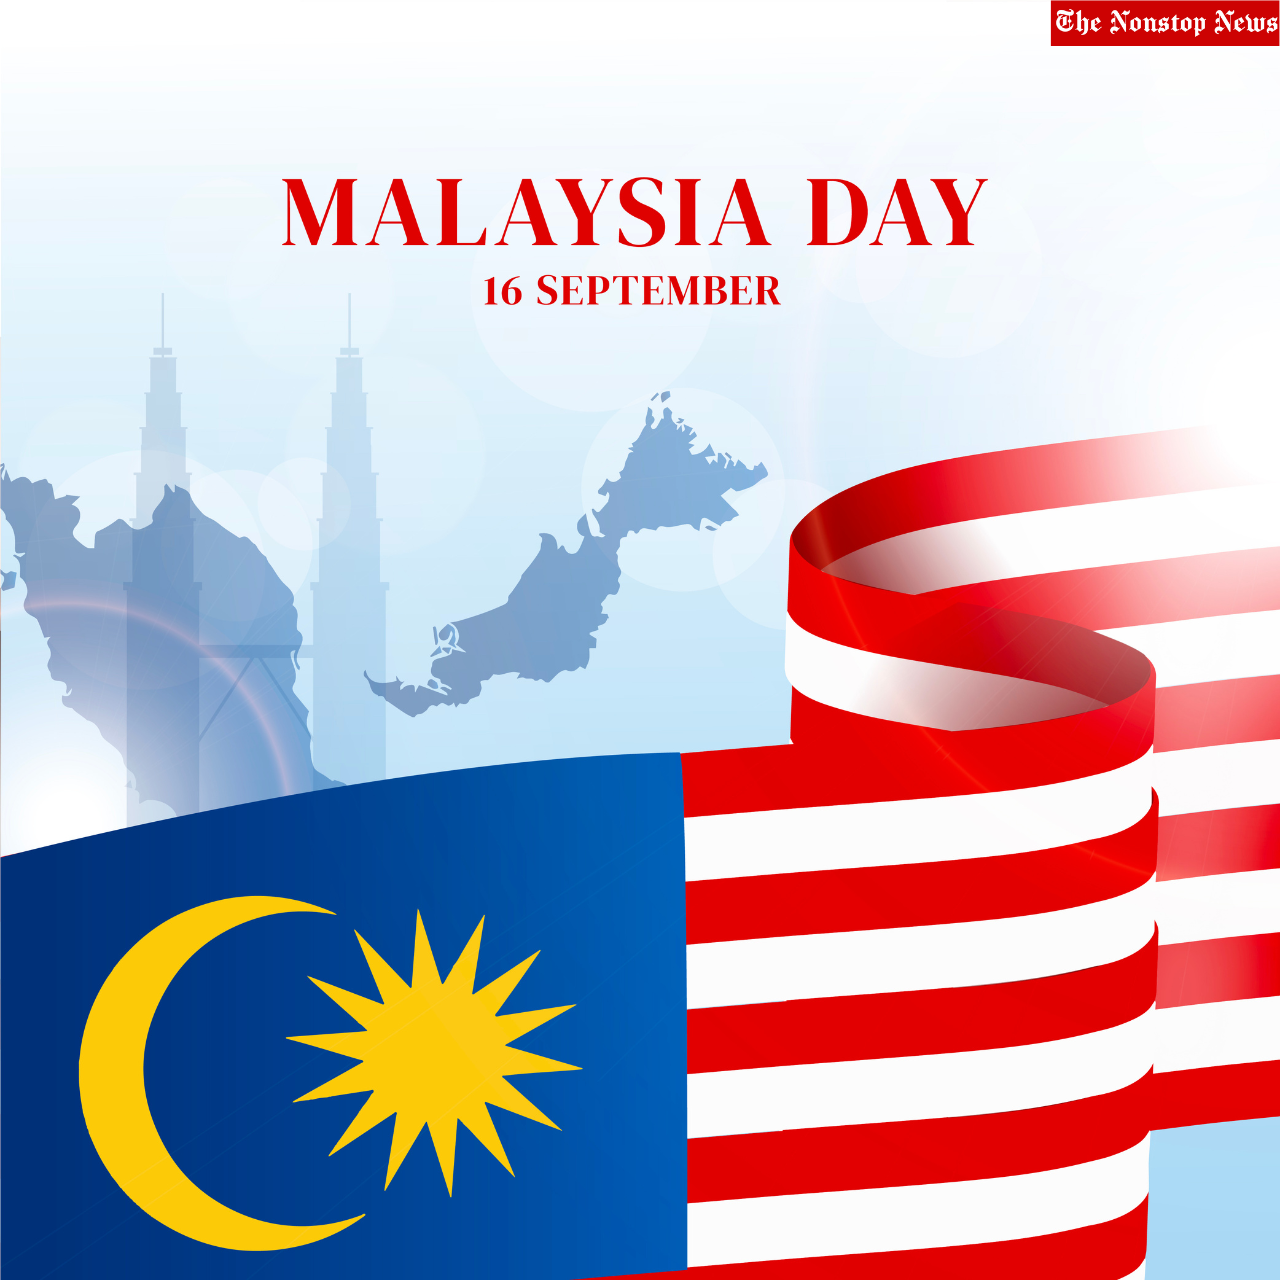 Malaysia Day 2022: Wishes, Quotes, Images, Messages, Greetings, Pictures, and Slogans to share